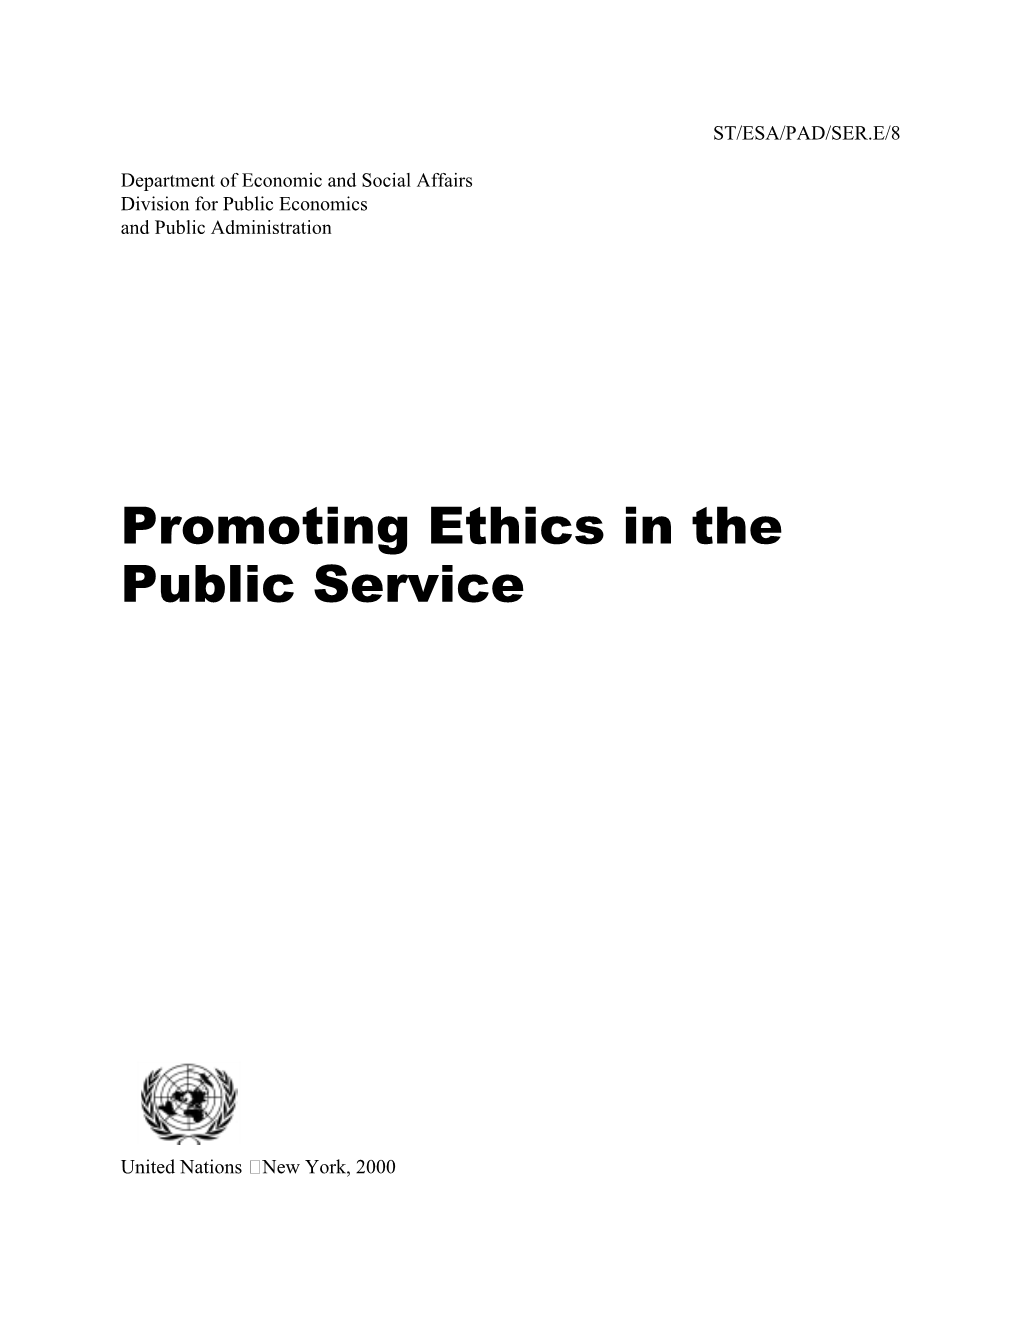 Promoting Ethics in the Public Service